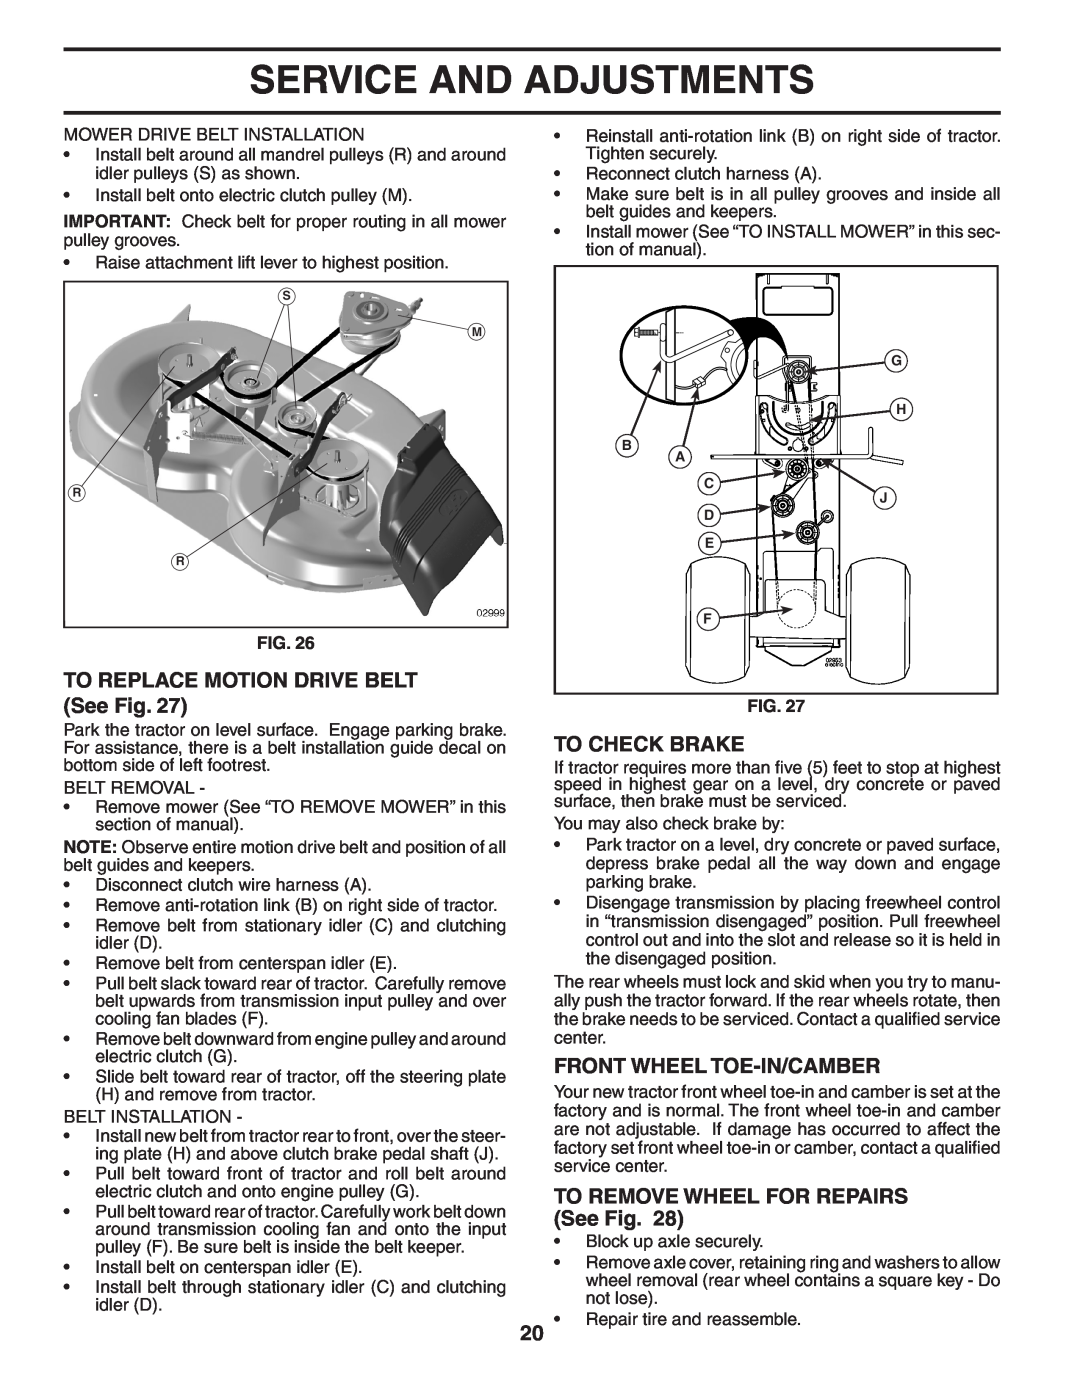 Husqvarna YTH2042XP owner manual TO REPLACE MOTION DRIVE BELT See Fig, To Check Brake, Front Wheel Toe-In/Camber 